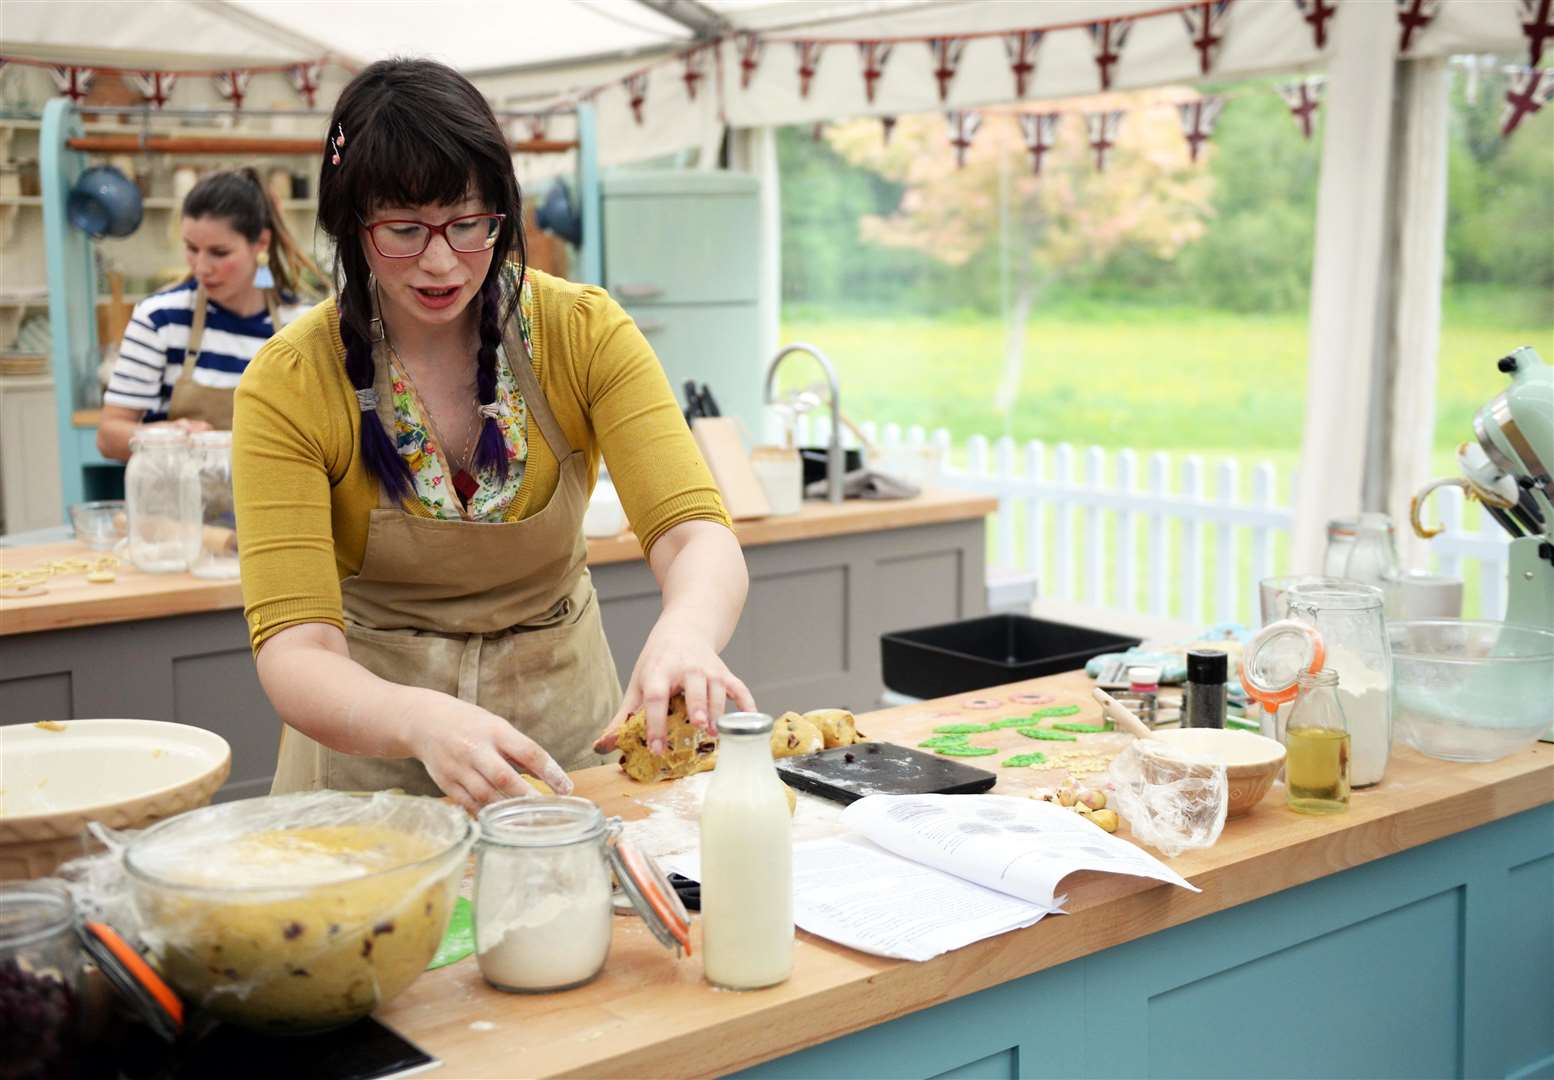 Kim-Joy was known for designing intricate animal scenes on her baking. Pic: Channel 4